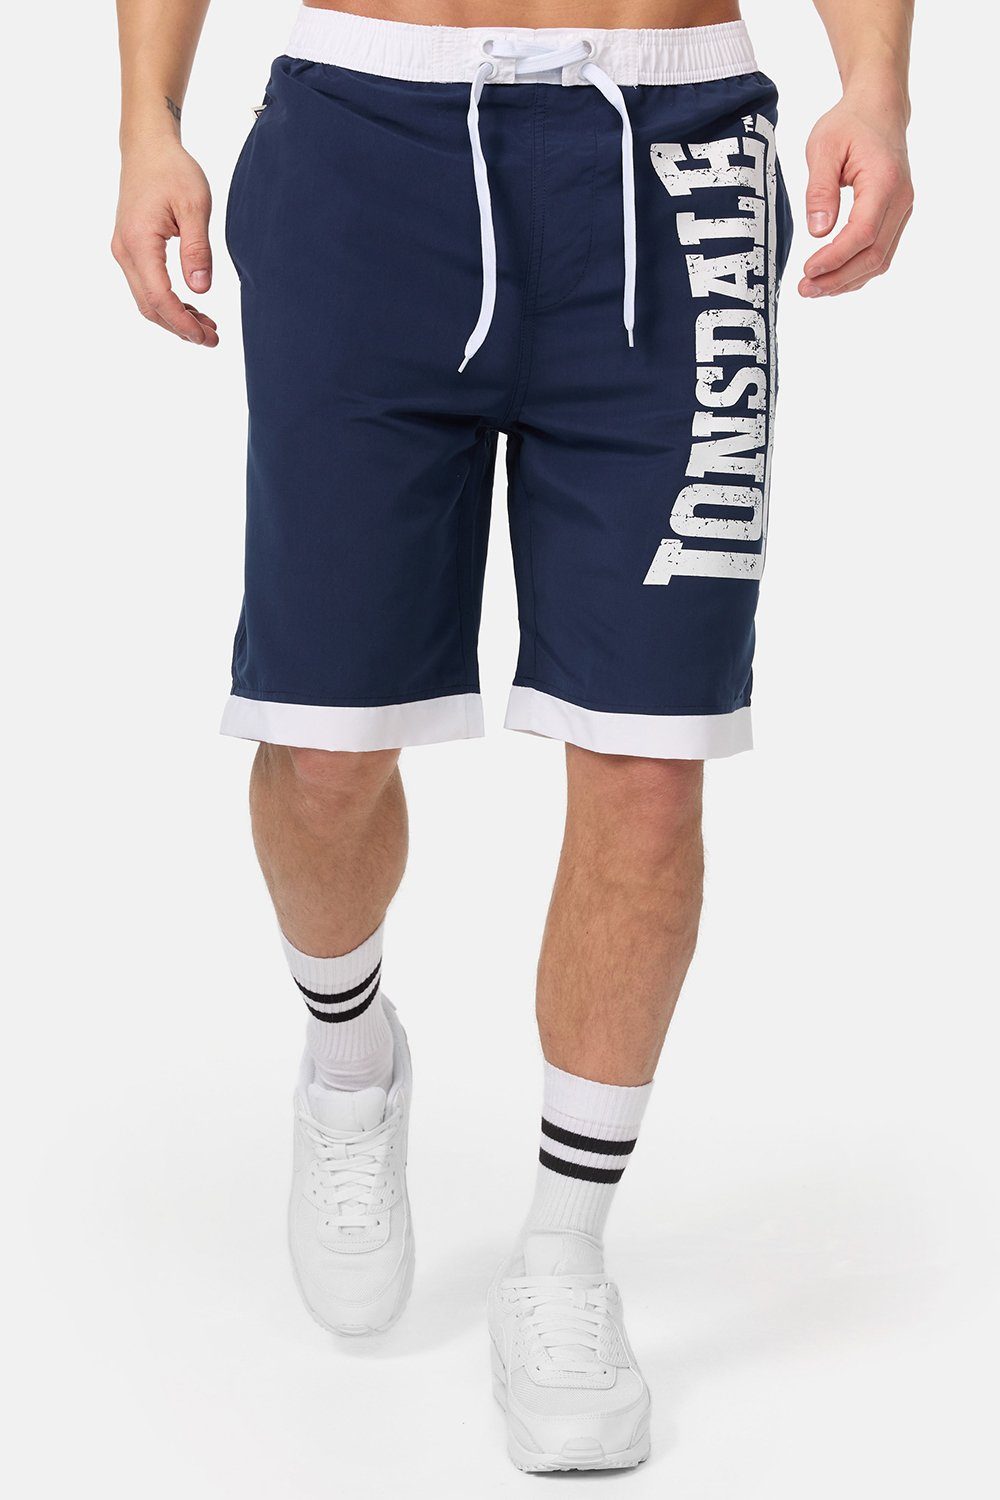 CLENNELL Lonsdale Navy/White Badehose